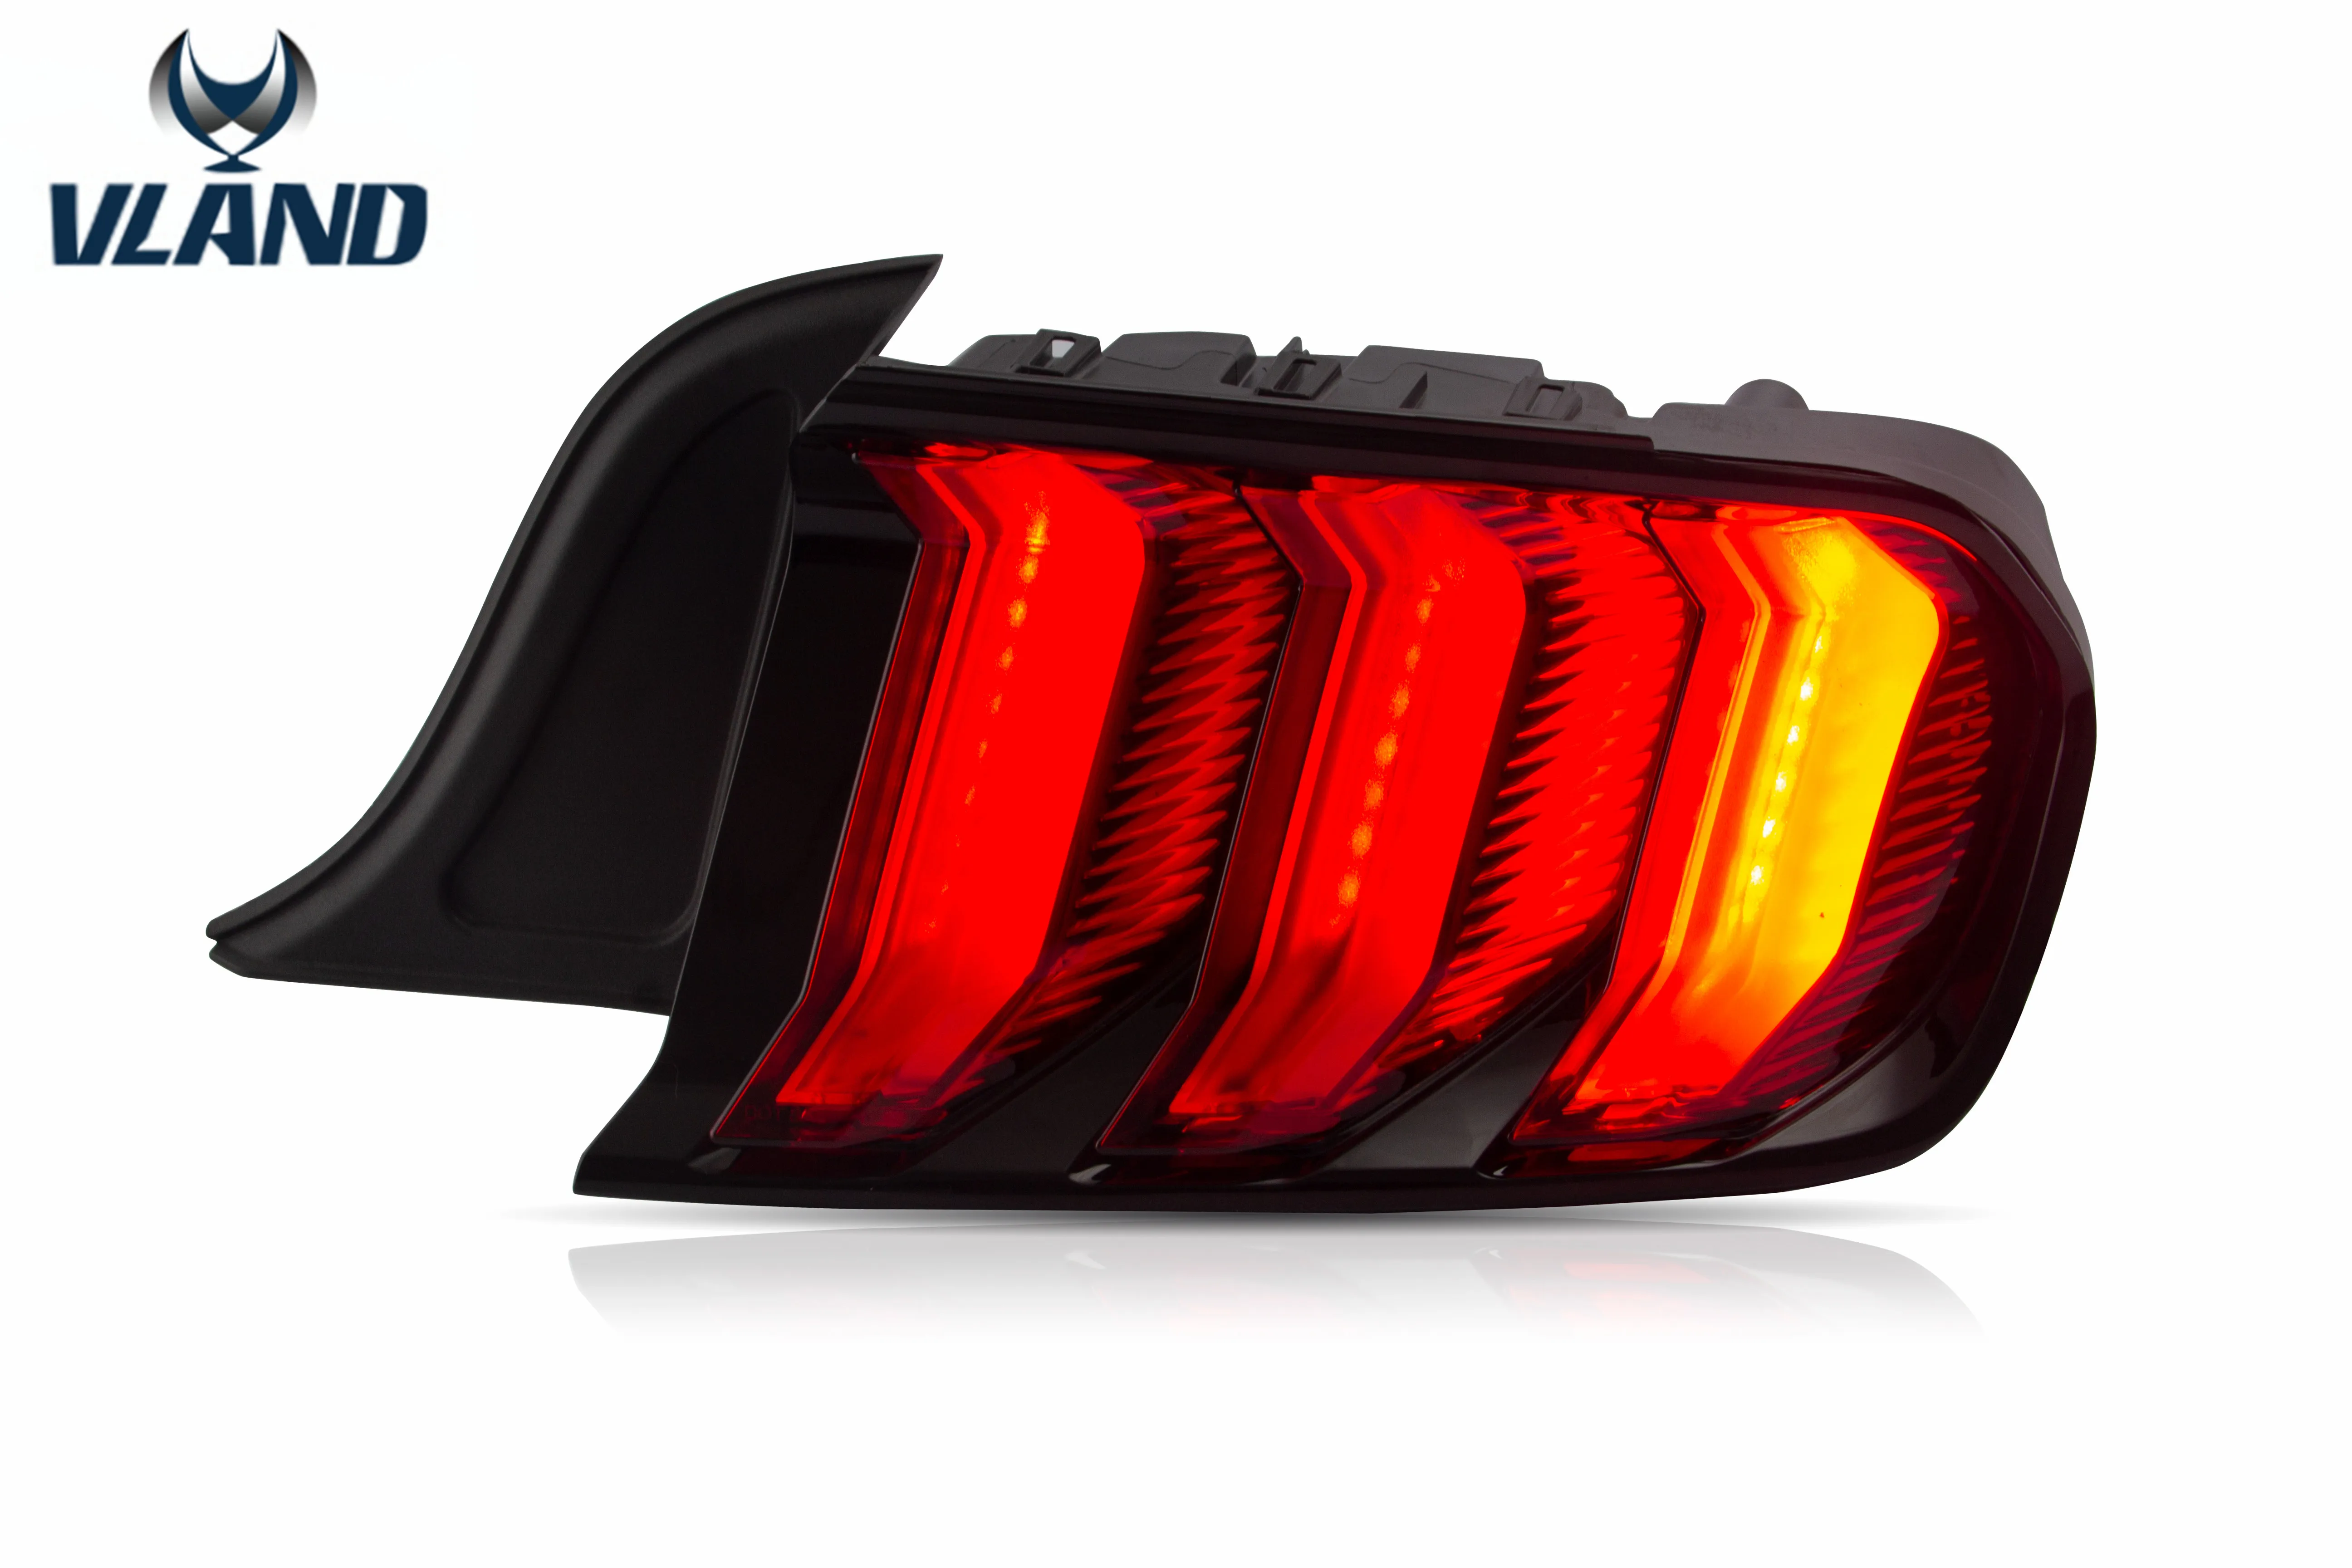 VLAND Manufacturer New Design FOR Mustang Taillights 2015 2016 2017 2018 2019 for US version LED Tail Light and Red Turn Signal